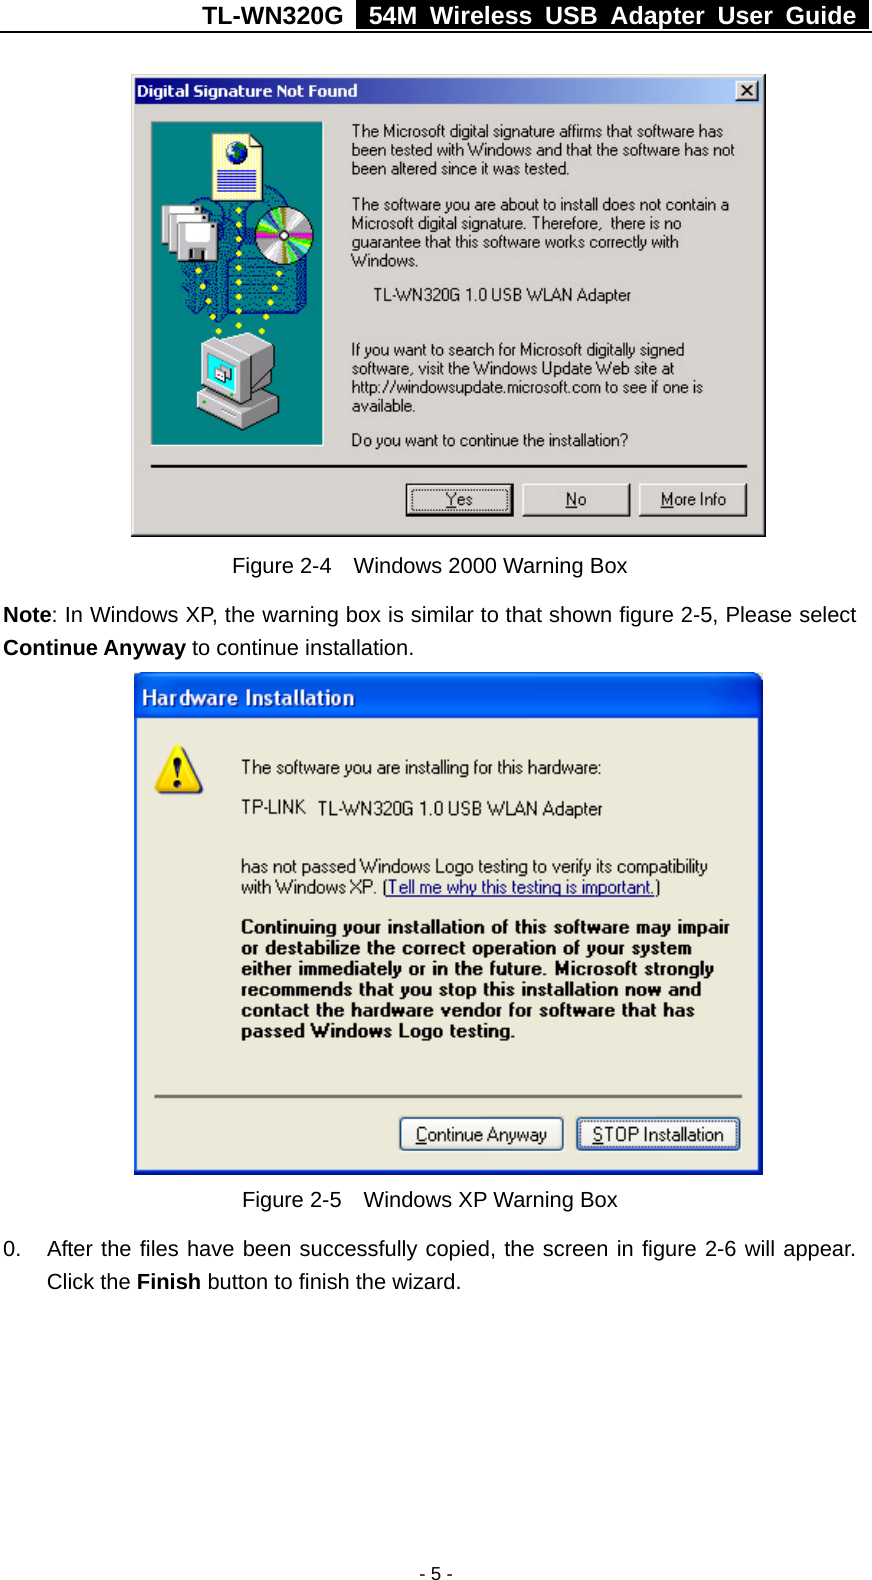 TL-WN320G   54M Wireless USB Adapter User Guide  - 5 -  Figure 2-4    Windows 2000 Warning Box Note: In Windows XP, the warning box is similar to that shown figure 2-5, Please select Continue Anyway to continue installation.  Figure 2-5    Windows XP Warning Box 0.  After the files have been successfully copied, the screen in figure 2-6 will appear. Click the Finish button to finish the wizard. 